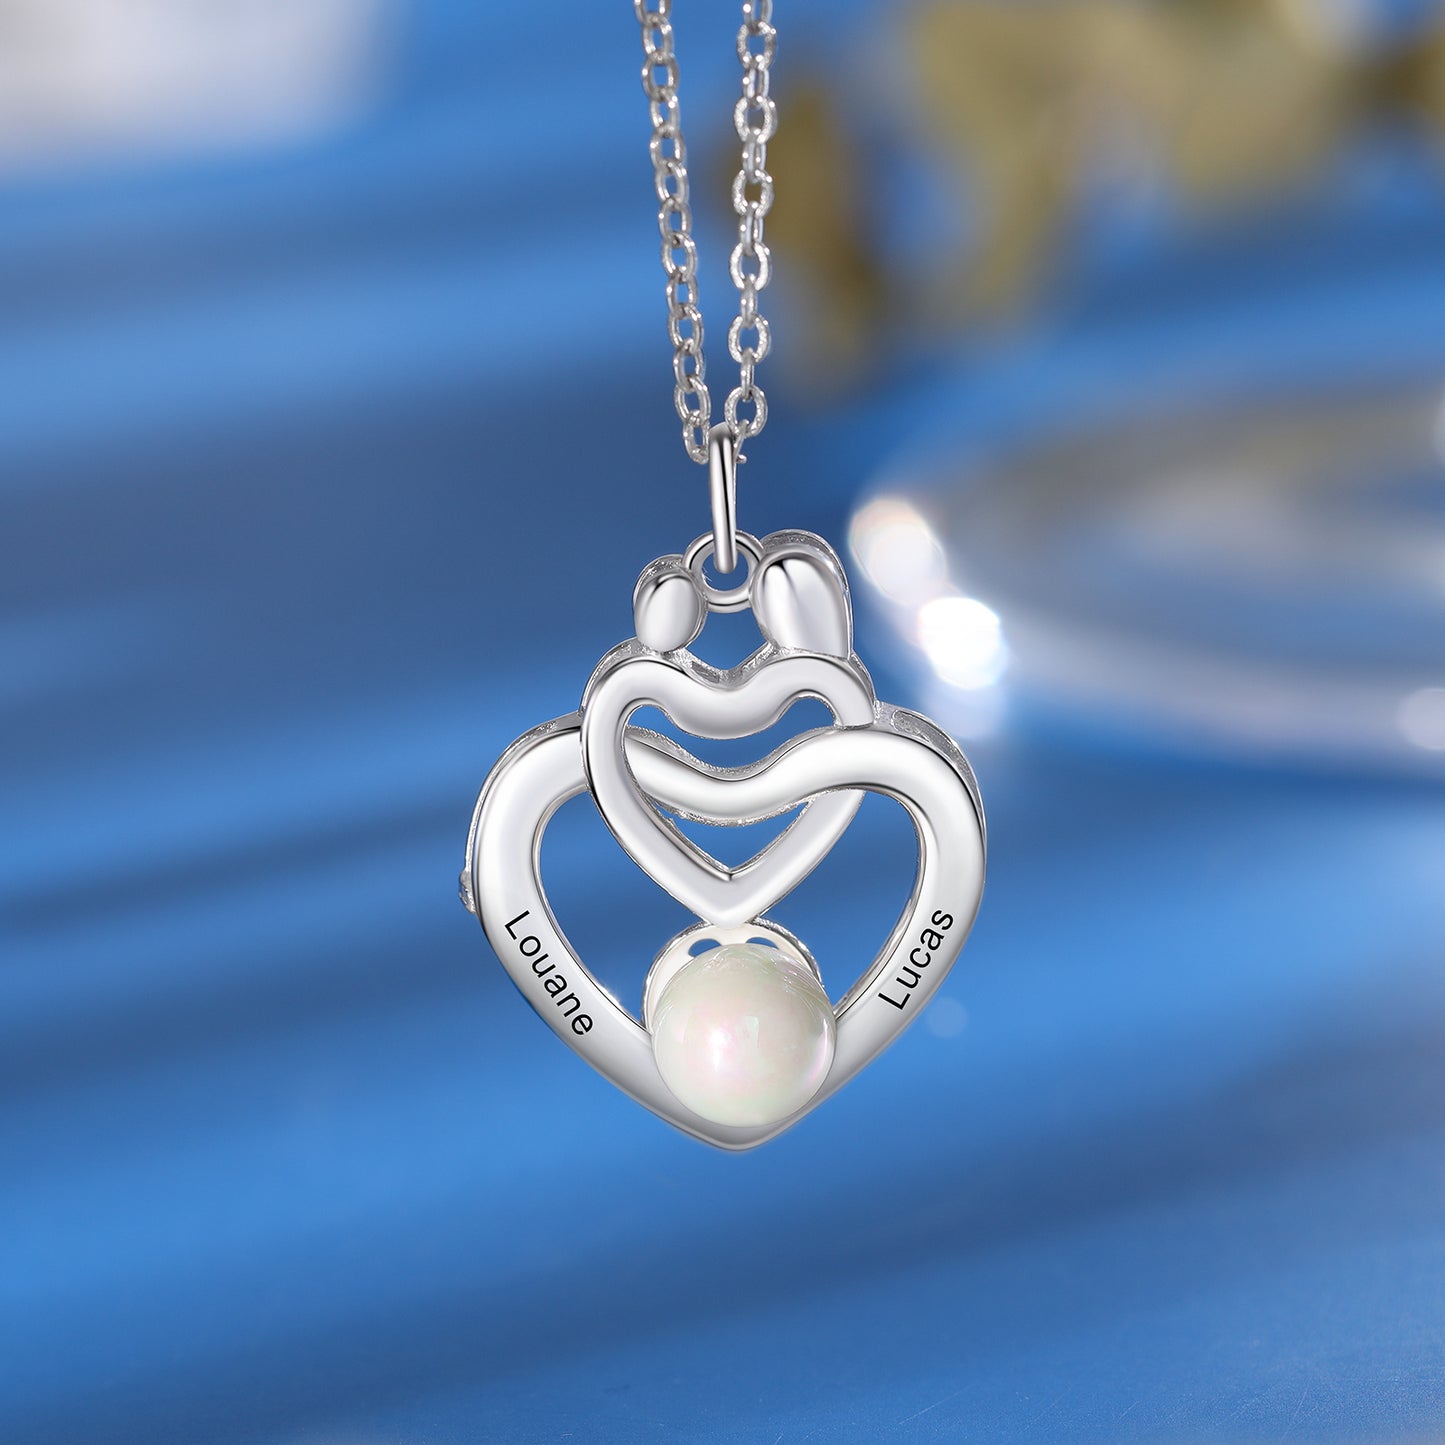 Custom Mother and Child Heart Necklace with Pearl